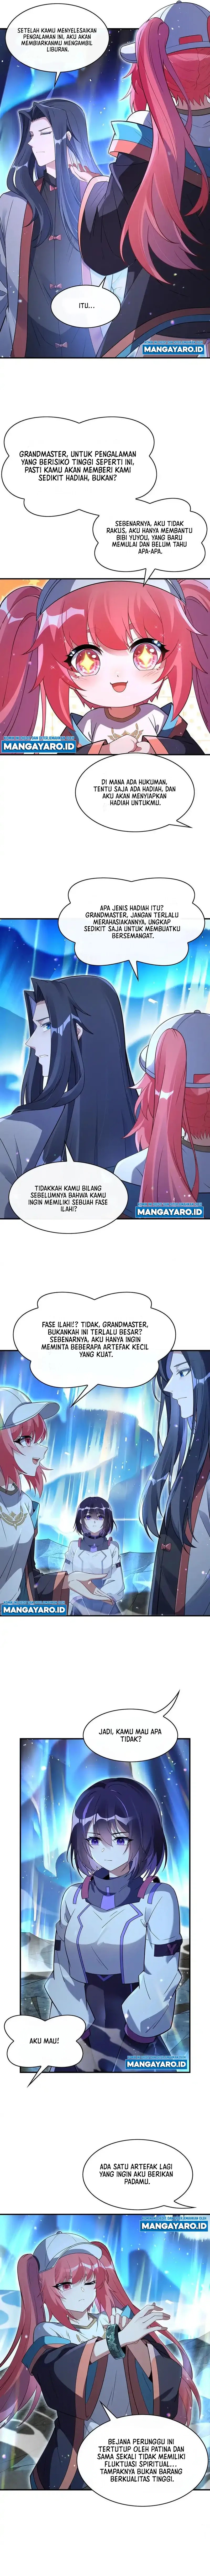 Dilarang COPAS - situs resmi www.mangacanblog.com - Komik my female apprentices are all big shots from the future 272 - chapter 272 273 Indonesia my female apprentices are all big shots from the future 272 - chapter 272 Terbaru 3|Baca Manga Komik Indonesia|Mangacan